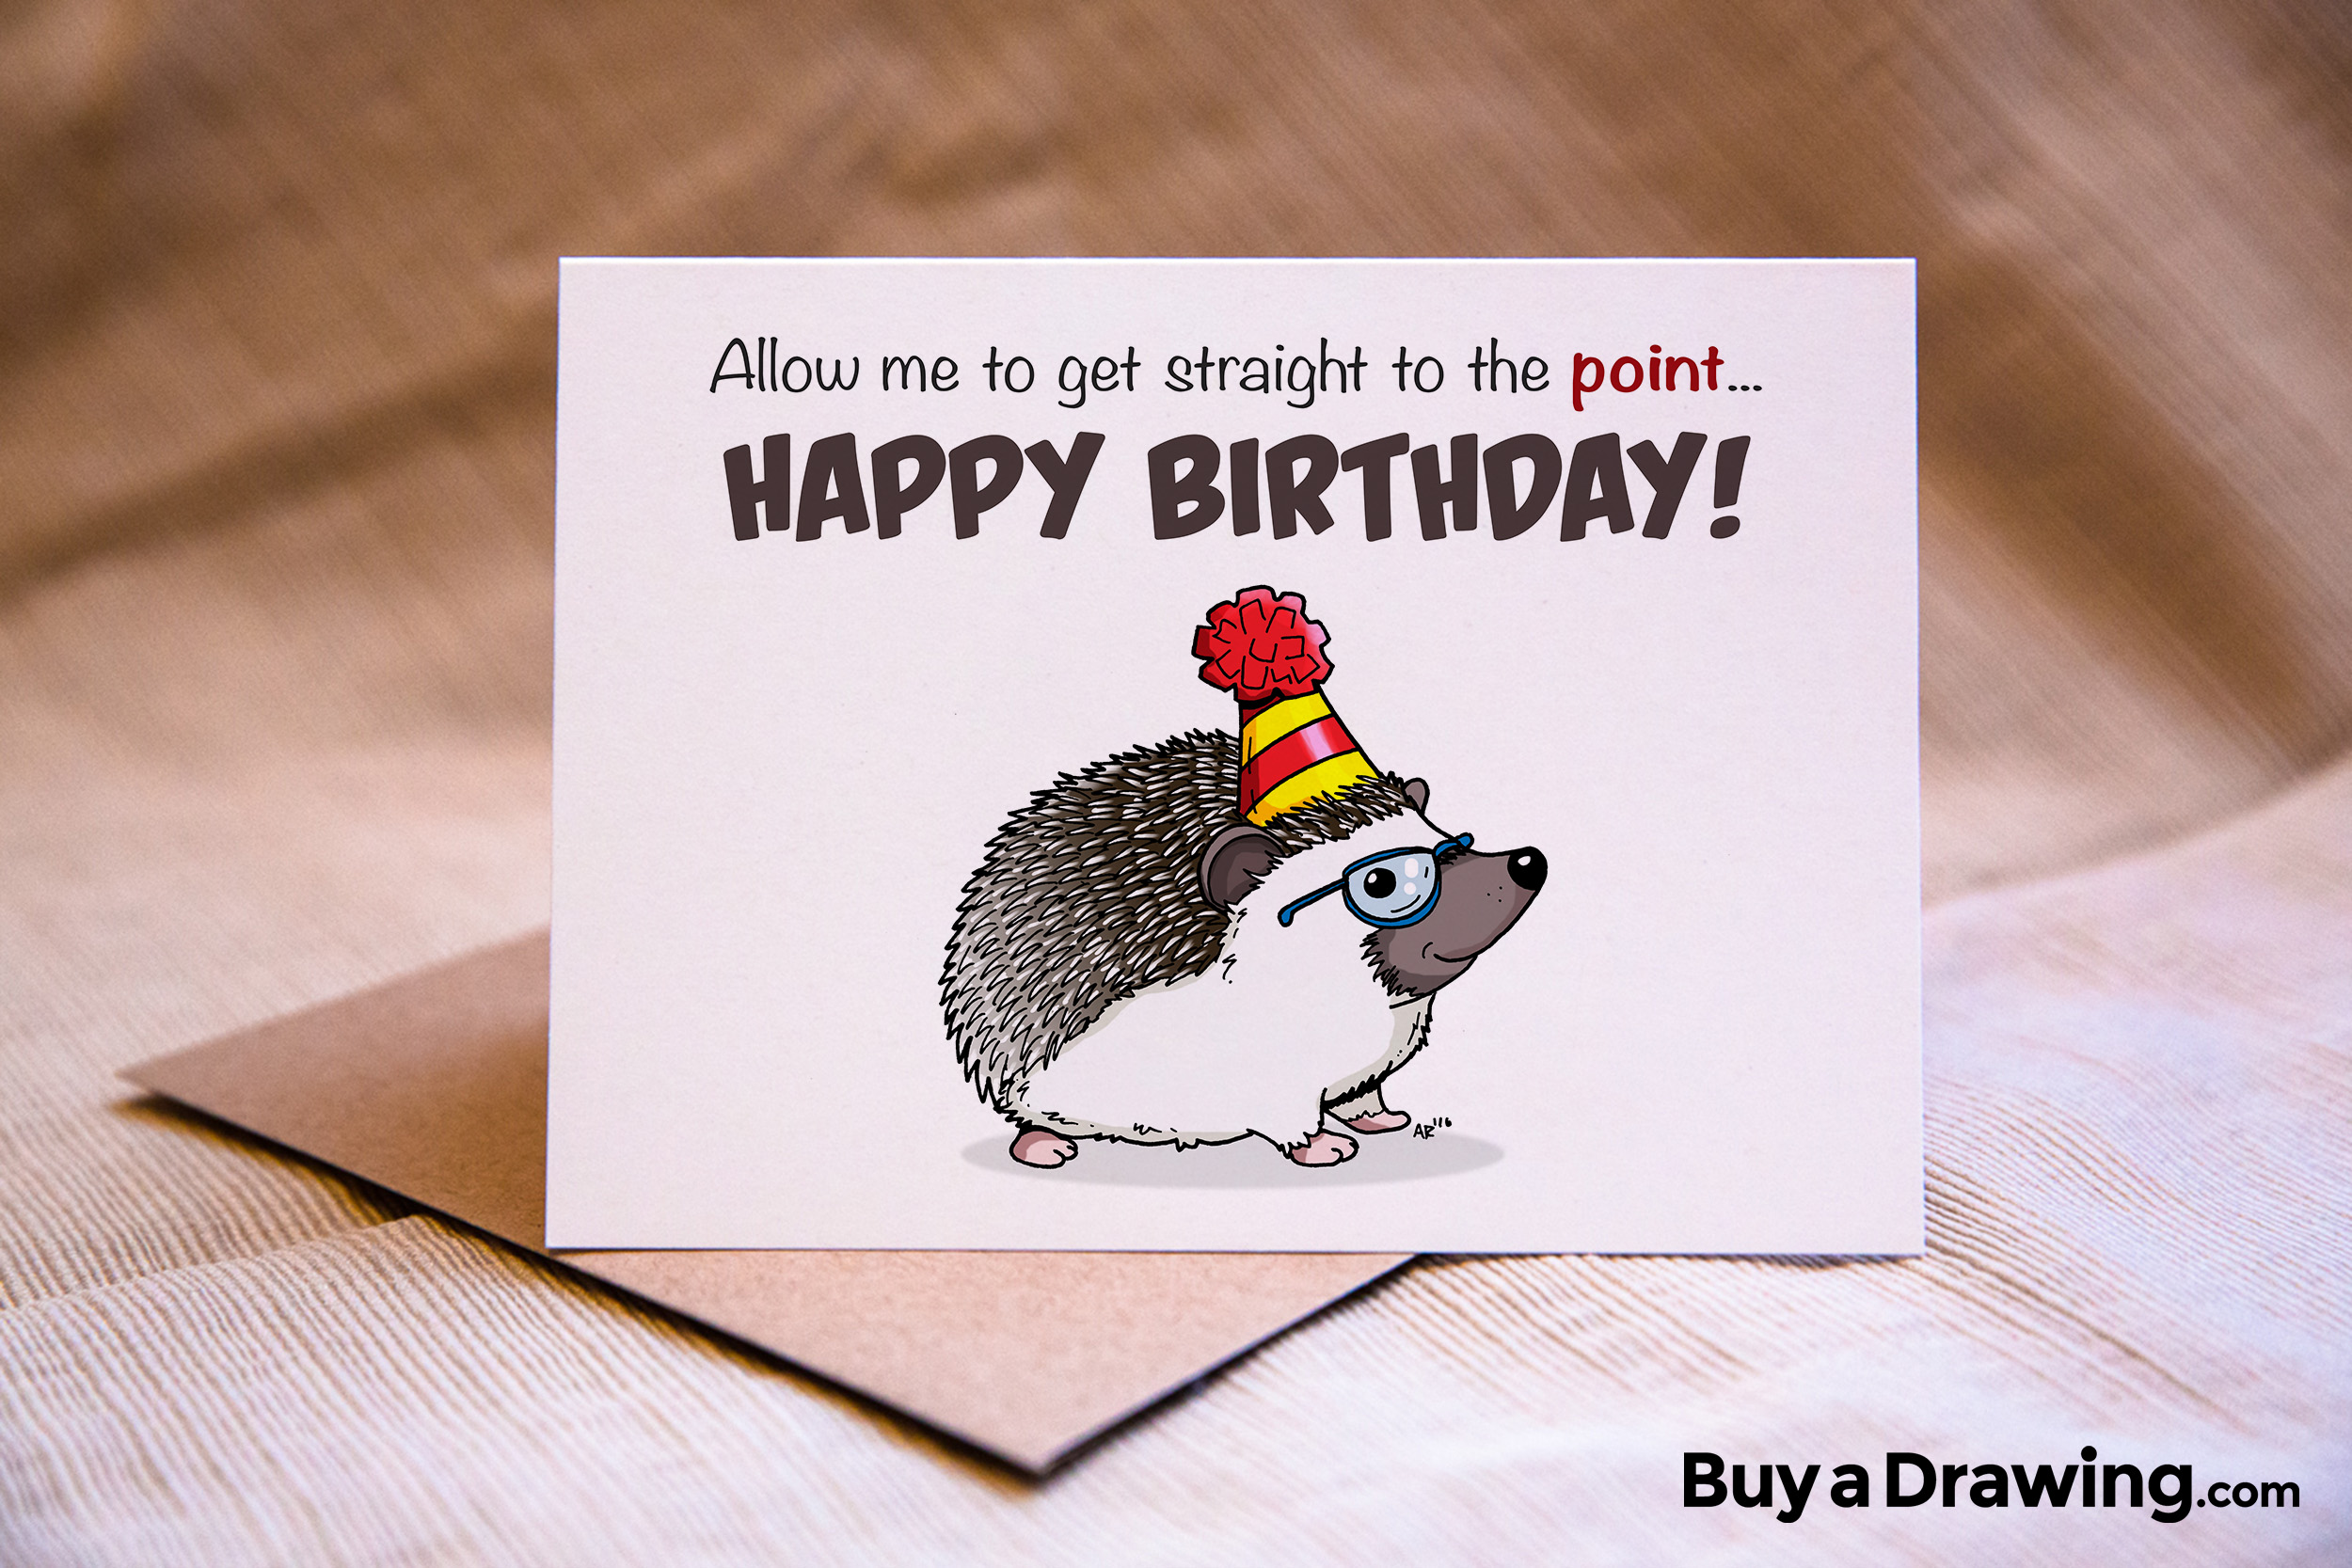 Hedgehog Birthday Card - Get to the Point BDay Card